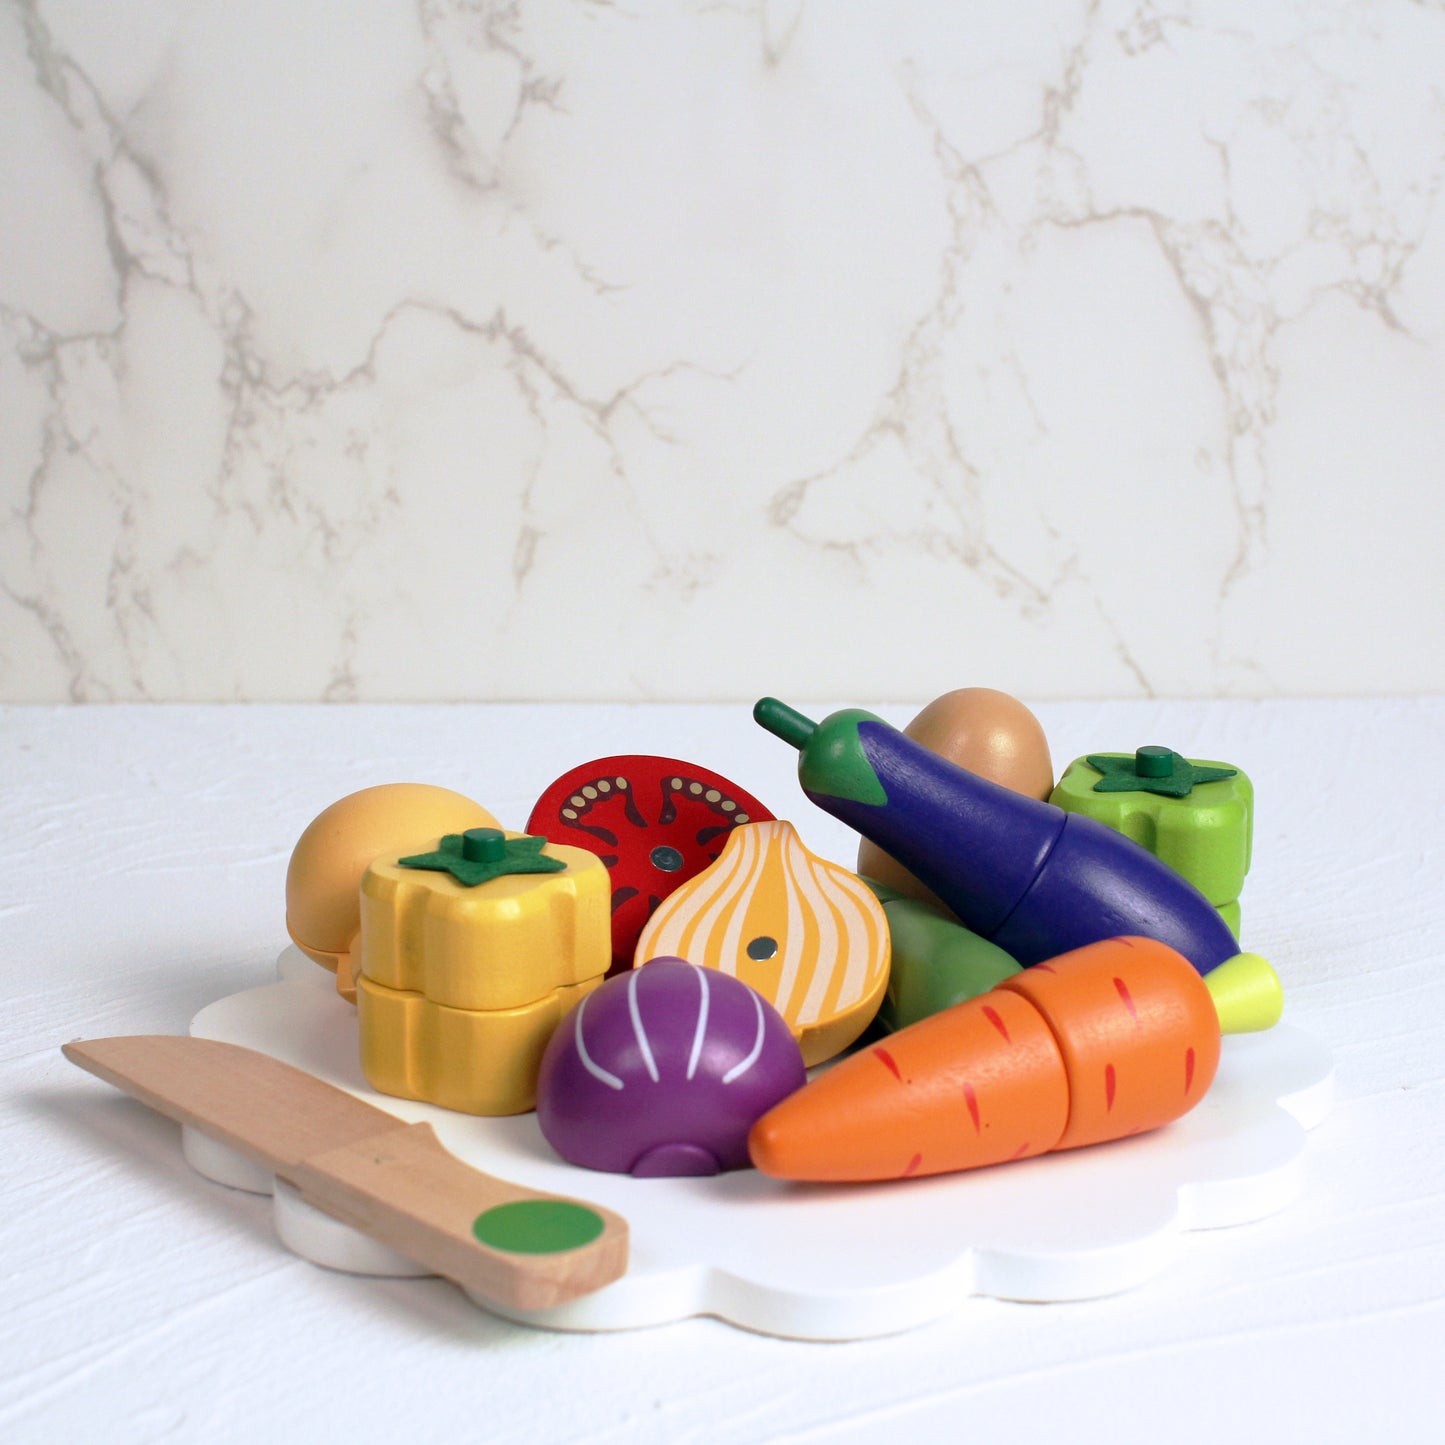 eco friendly colourful wooden vegetables - potato, mushroom, carrot, tomato, onion, eggplant, peppers, cucumber - wooden knife included with tray